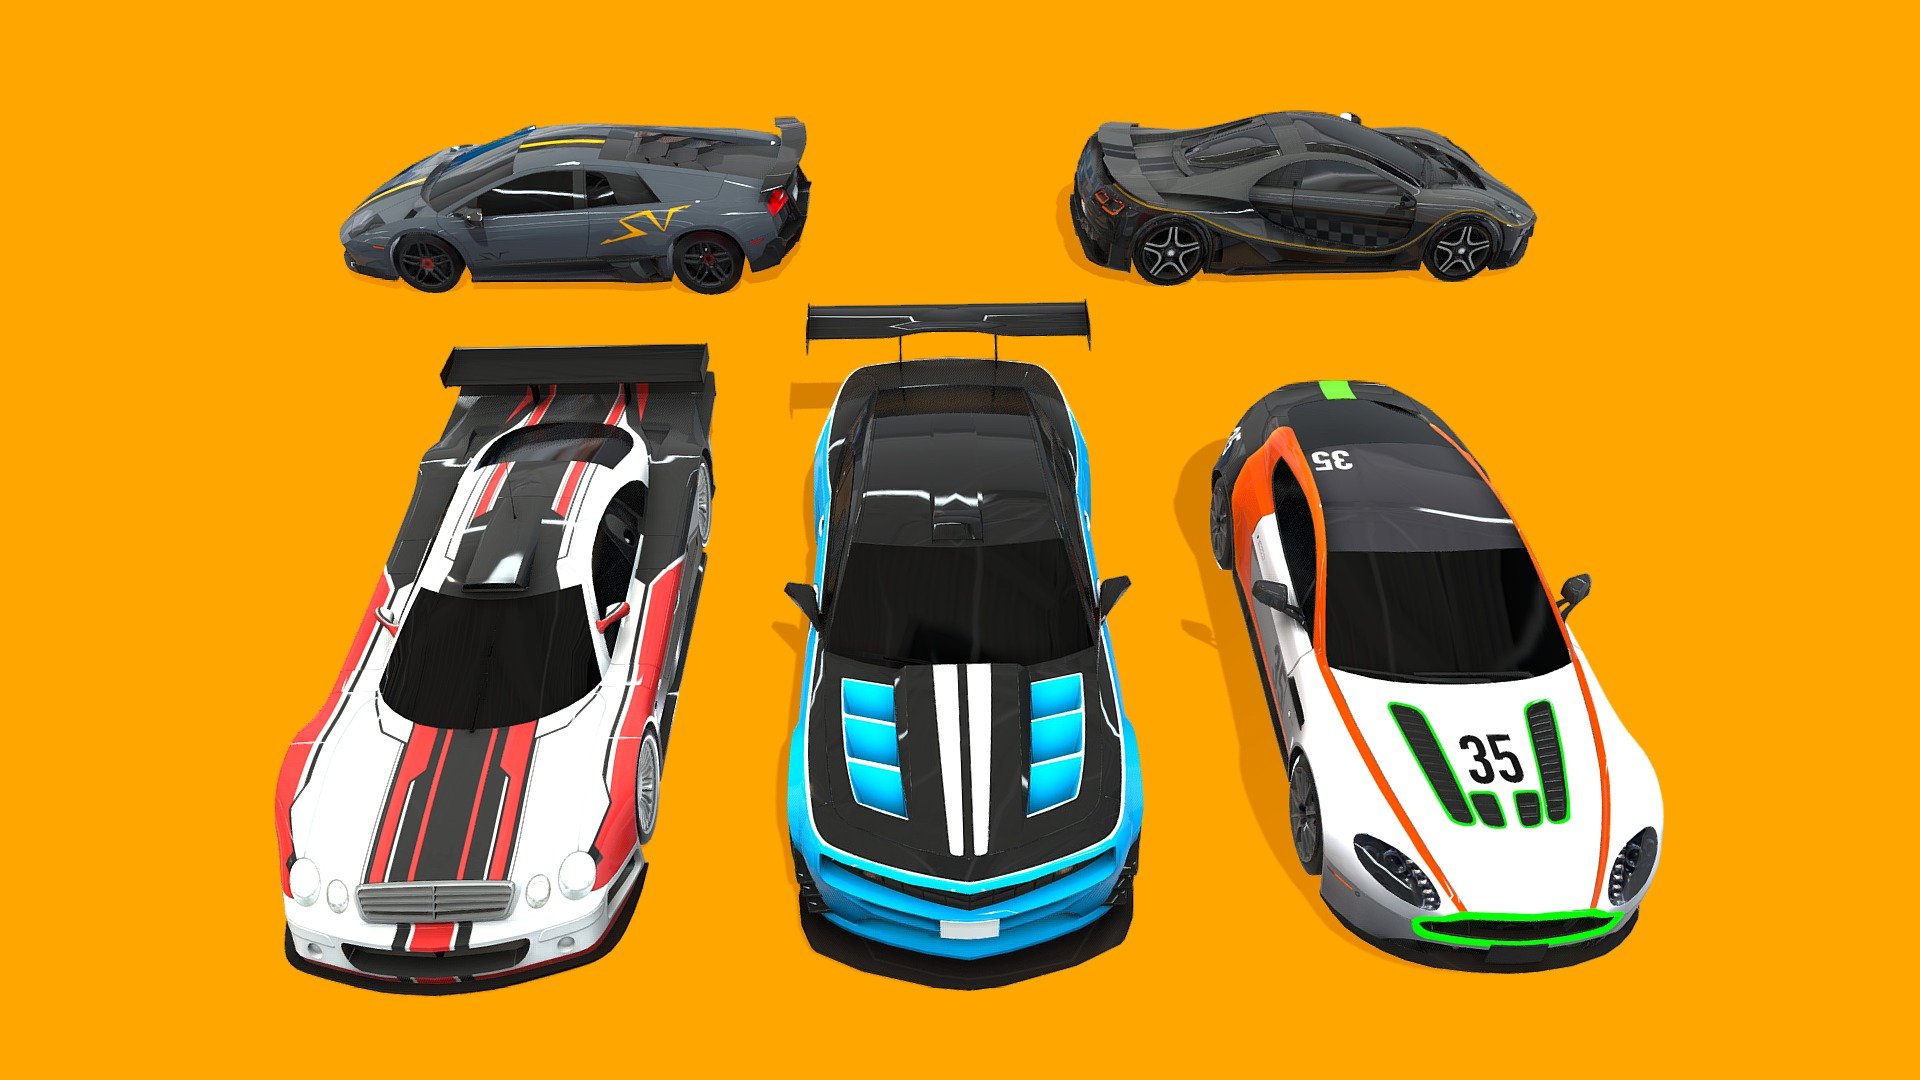 Rev up your game with our Low Poly Super Cars Pack, a stunning collection of 3D models designed to elevate your project to the next level. These mobile-friendly and meticulously rigged car models are perfect for any racing, simulation, or mobile game project. 

Technical Details:

Texture dimensions: 1024px, 512px

Number of models: 5

Rigged: Yes

UV mapping: Yes

Polygon Counts:

ExoFlare: 12.5k Vertices

XenonVelocity: 12.9k Vertices

NebulaRider: 11.6k Vertices

NovaPhenom: 16k Vertices

PhotonTrust: 13k Vertices

Whether you're developing a high-speed racing game or simply want to add some stylish vehicles to your project, our Low Poly 5 Super Cars Pack has got you covered. Get ready to rev your engines and create unforgettable gaming experiences! - Super Cars Pack - Low Poly - Buy Royalty Free 3D model by Zero Grid (@Zerogrid) 3d model